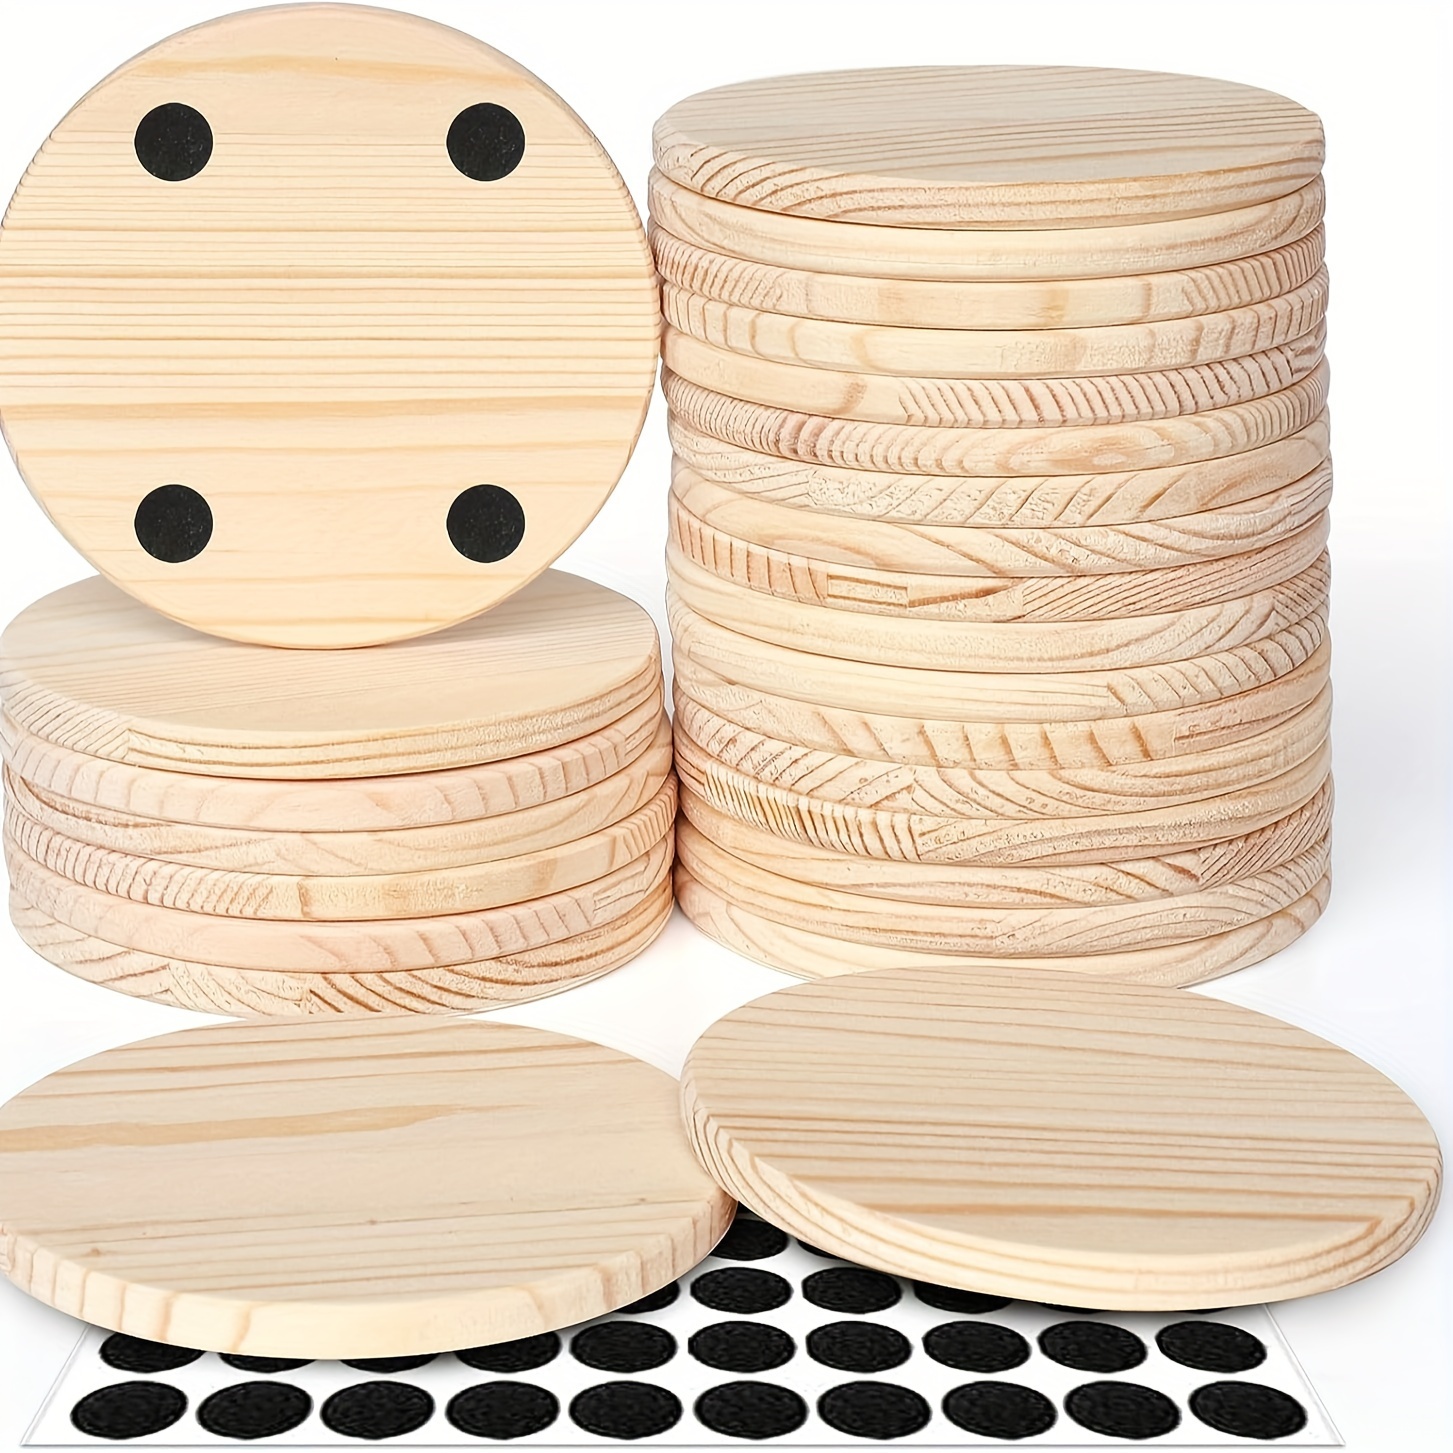 26 pieces wood coasters 4 inch round blank wooden coasters for crafts with non slip silicon dots for diy stained painting wood engraving home decoration